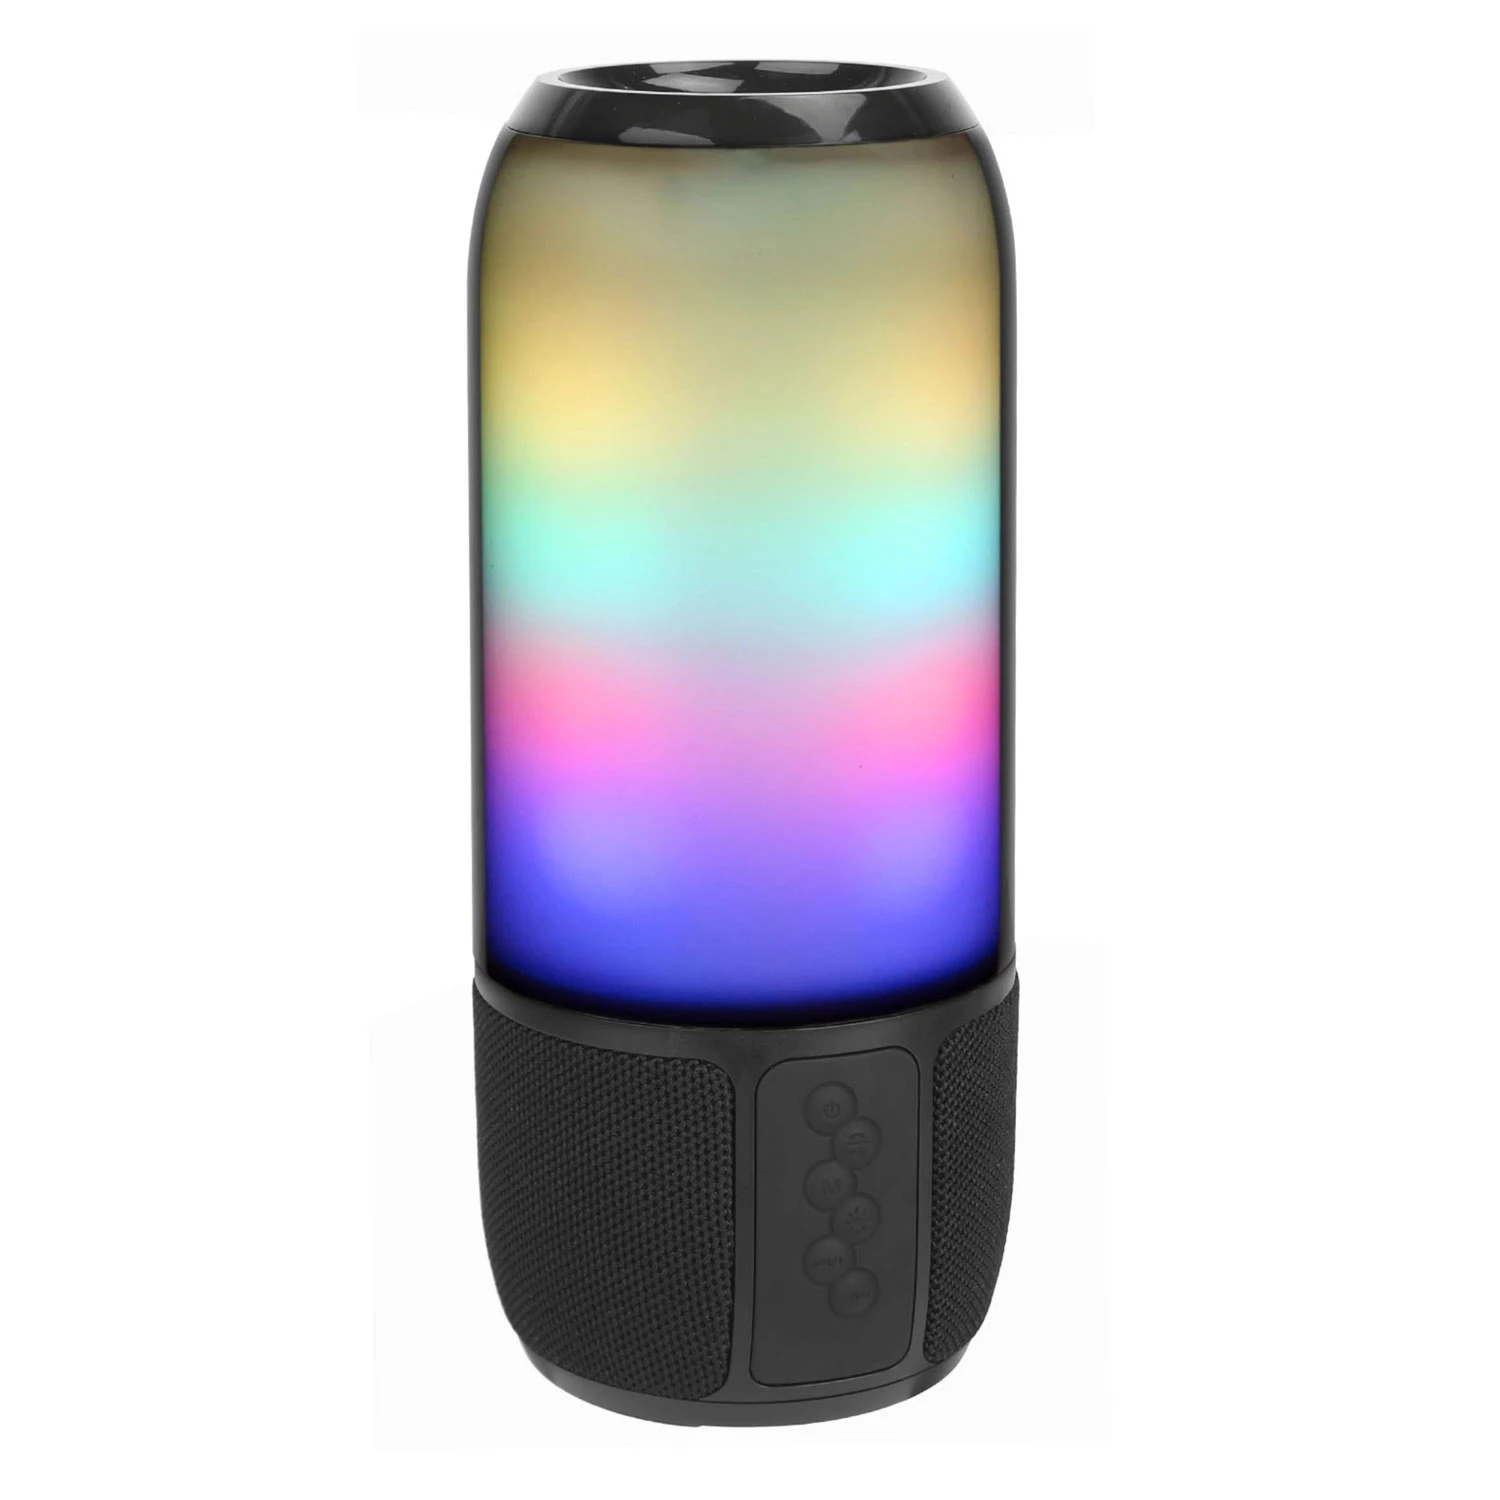 Portable Wireless Speaker With 6 Color Changing Lights - Loud Stereo, Radio, TWS - For Home, Outdoor